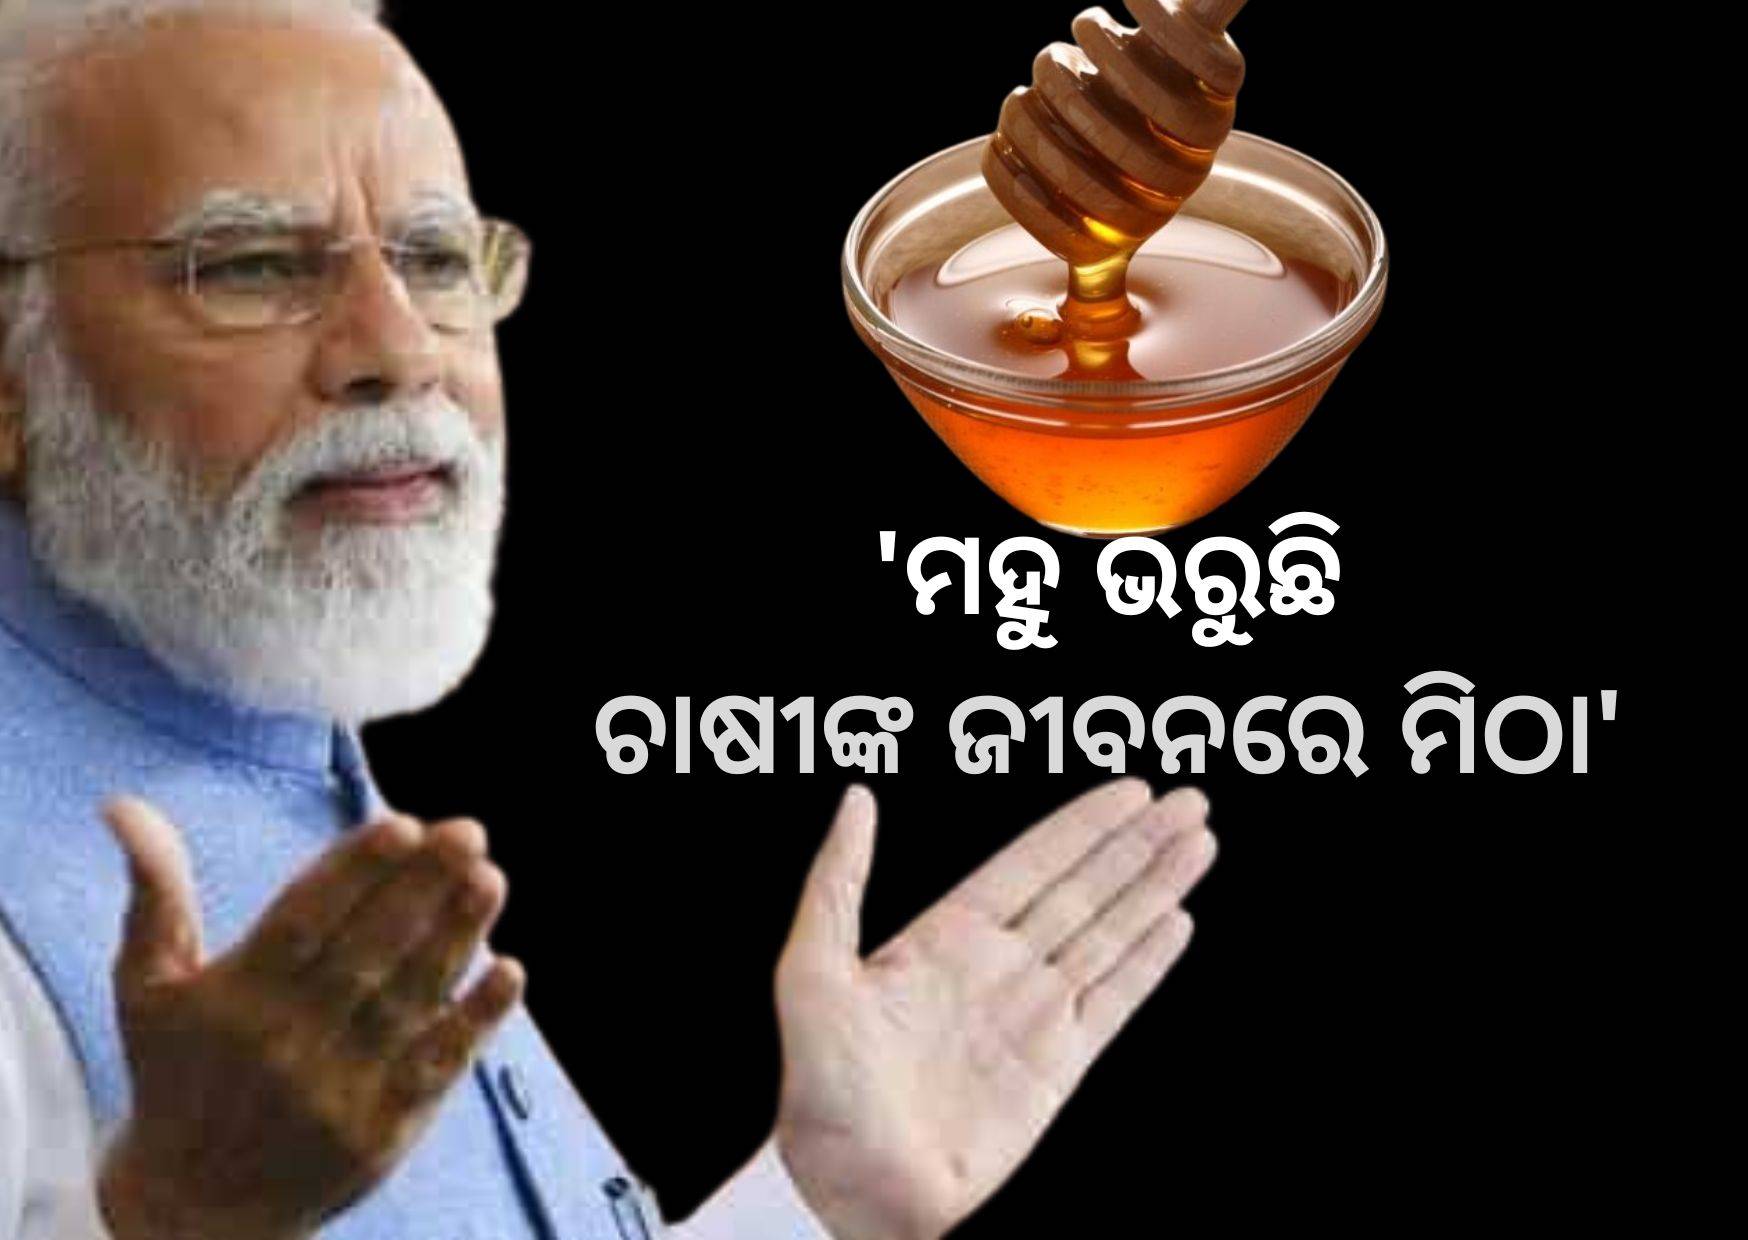 The life of farmers is changing with the sweetness of honey, says pm modi in Mann Ki Baat